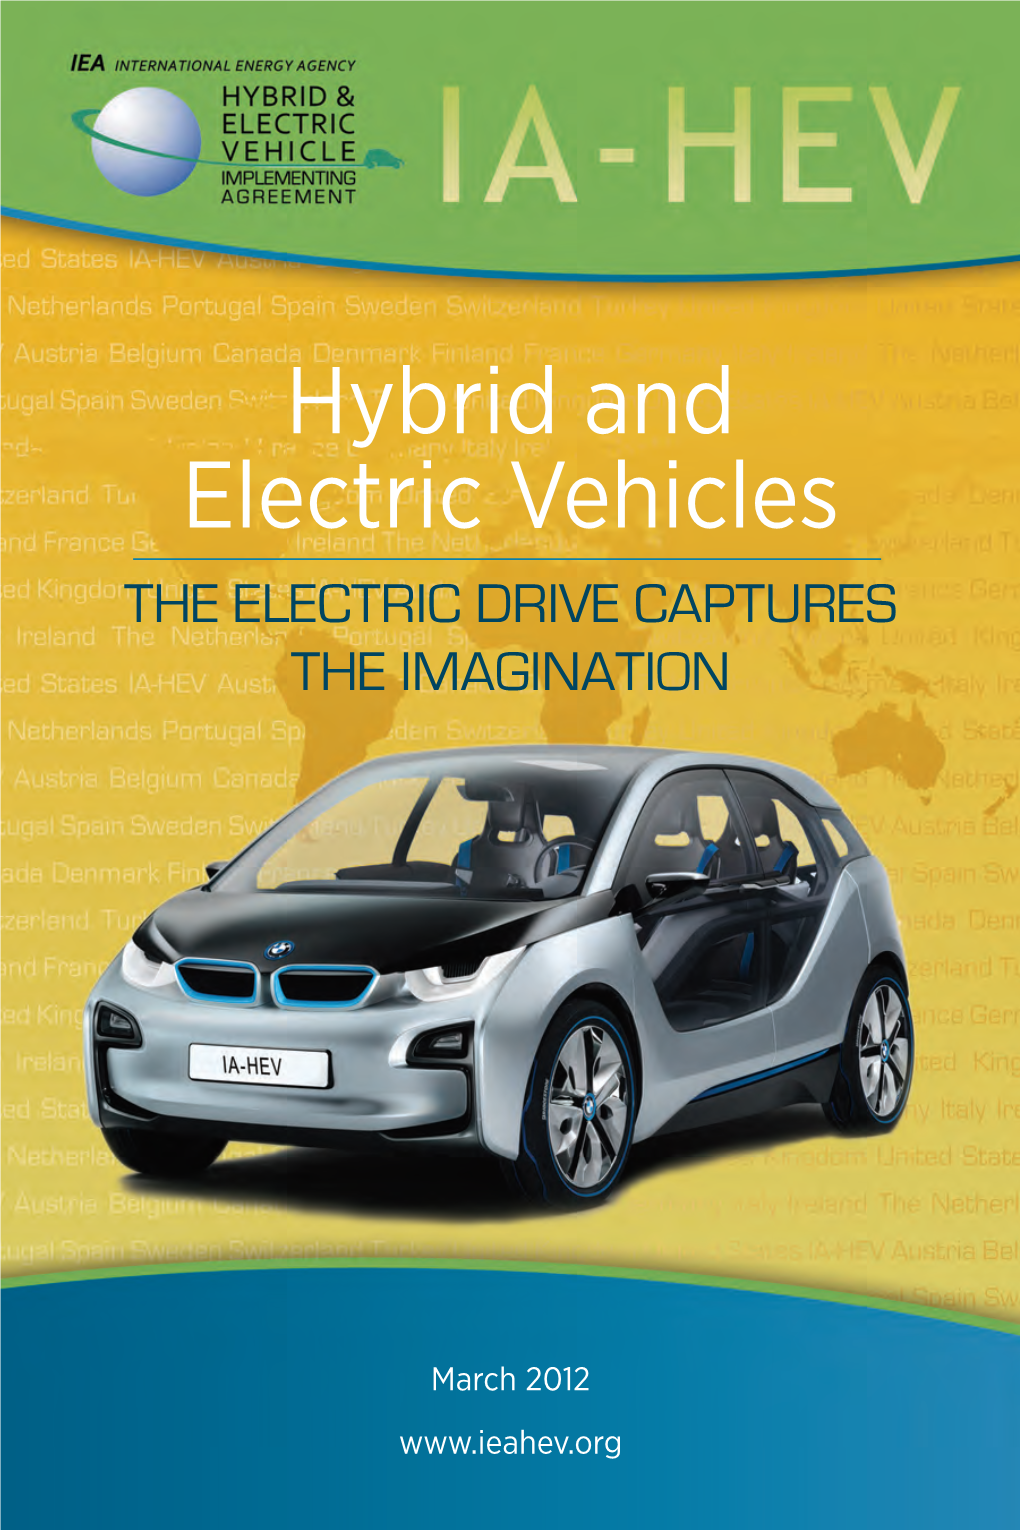 Hybrid and Electric Vehicles the ELECTRIC DRIVE CAPTURES the IMAGINATION